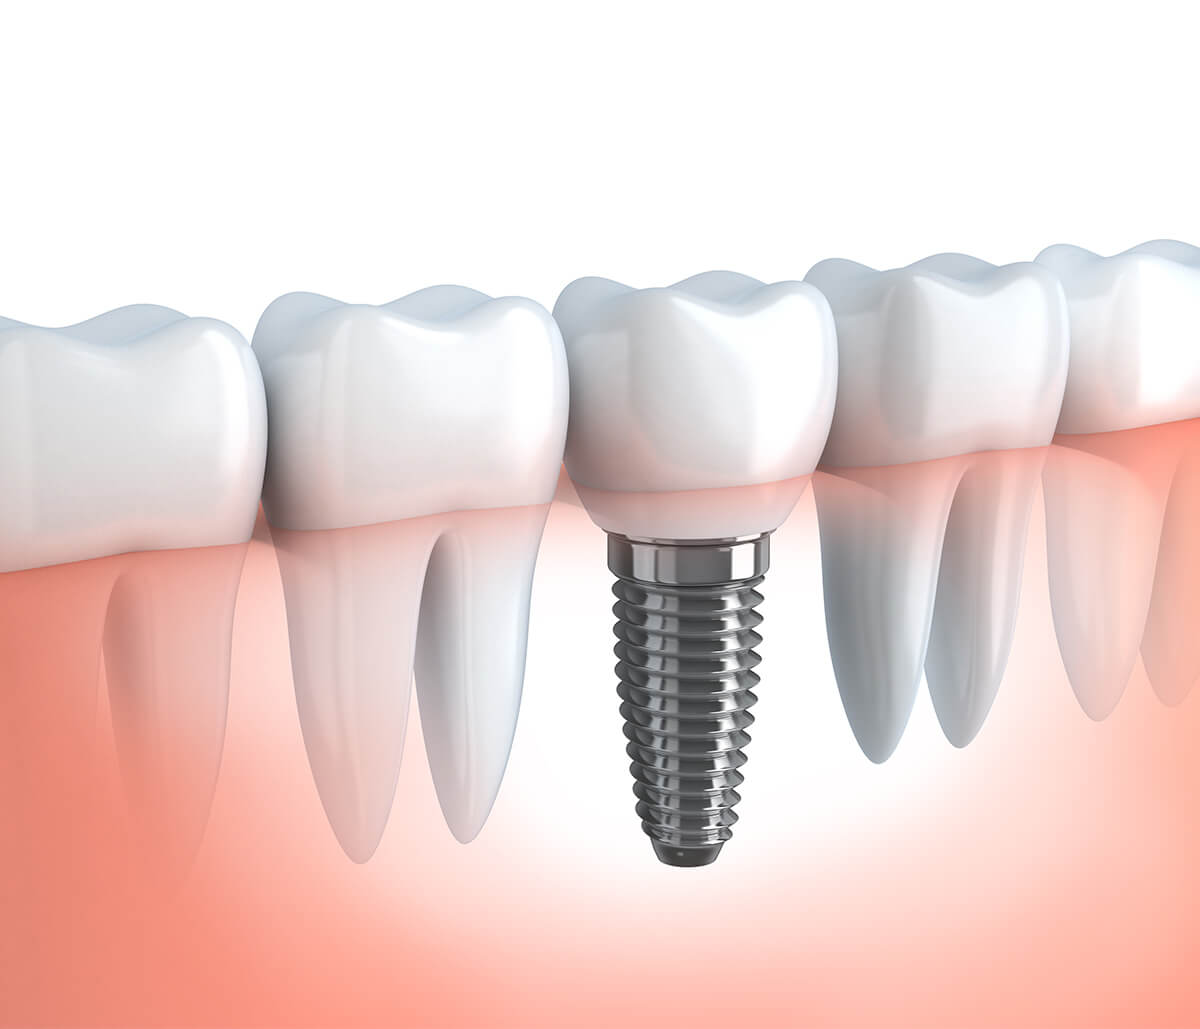 Dental Implant Care After Surgery in Houston TX Area